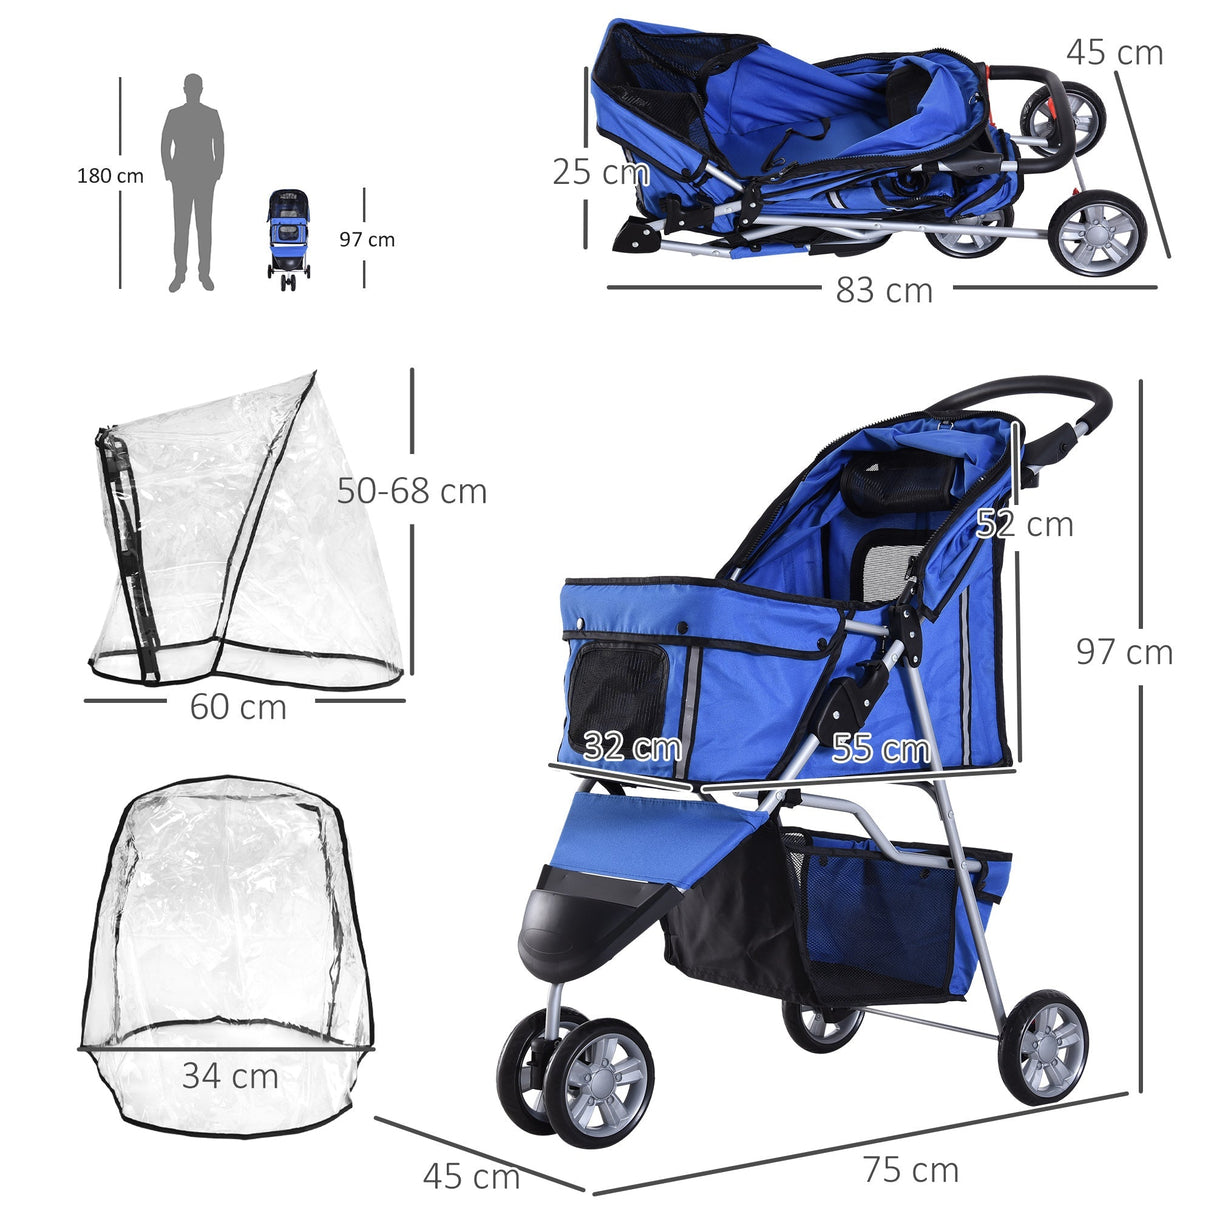 Dog Stroller with Cover for Small Miniature Dogs, Folding Cat Pram Dog Pushchair with Cup Holder, Storage Basket, Reflective Strips, PawHut, Blue